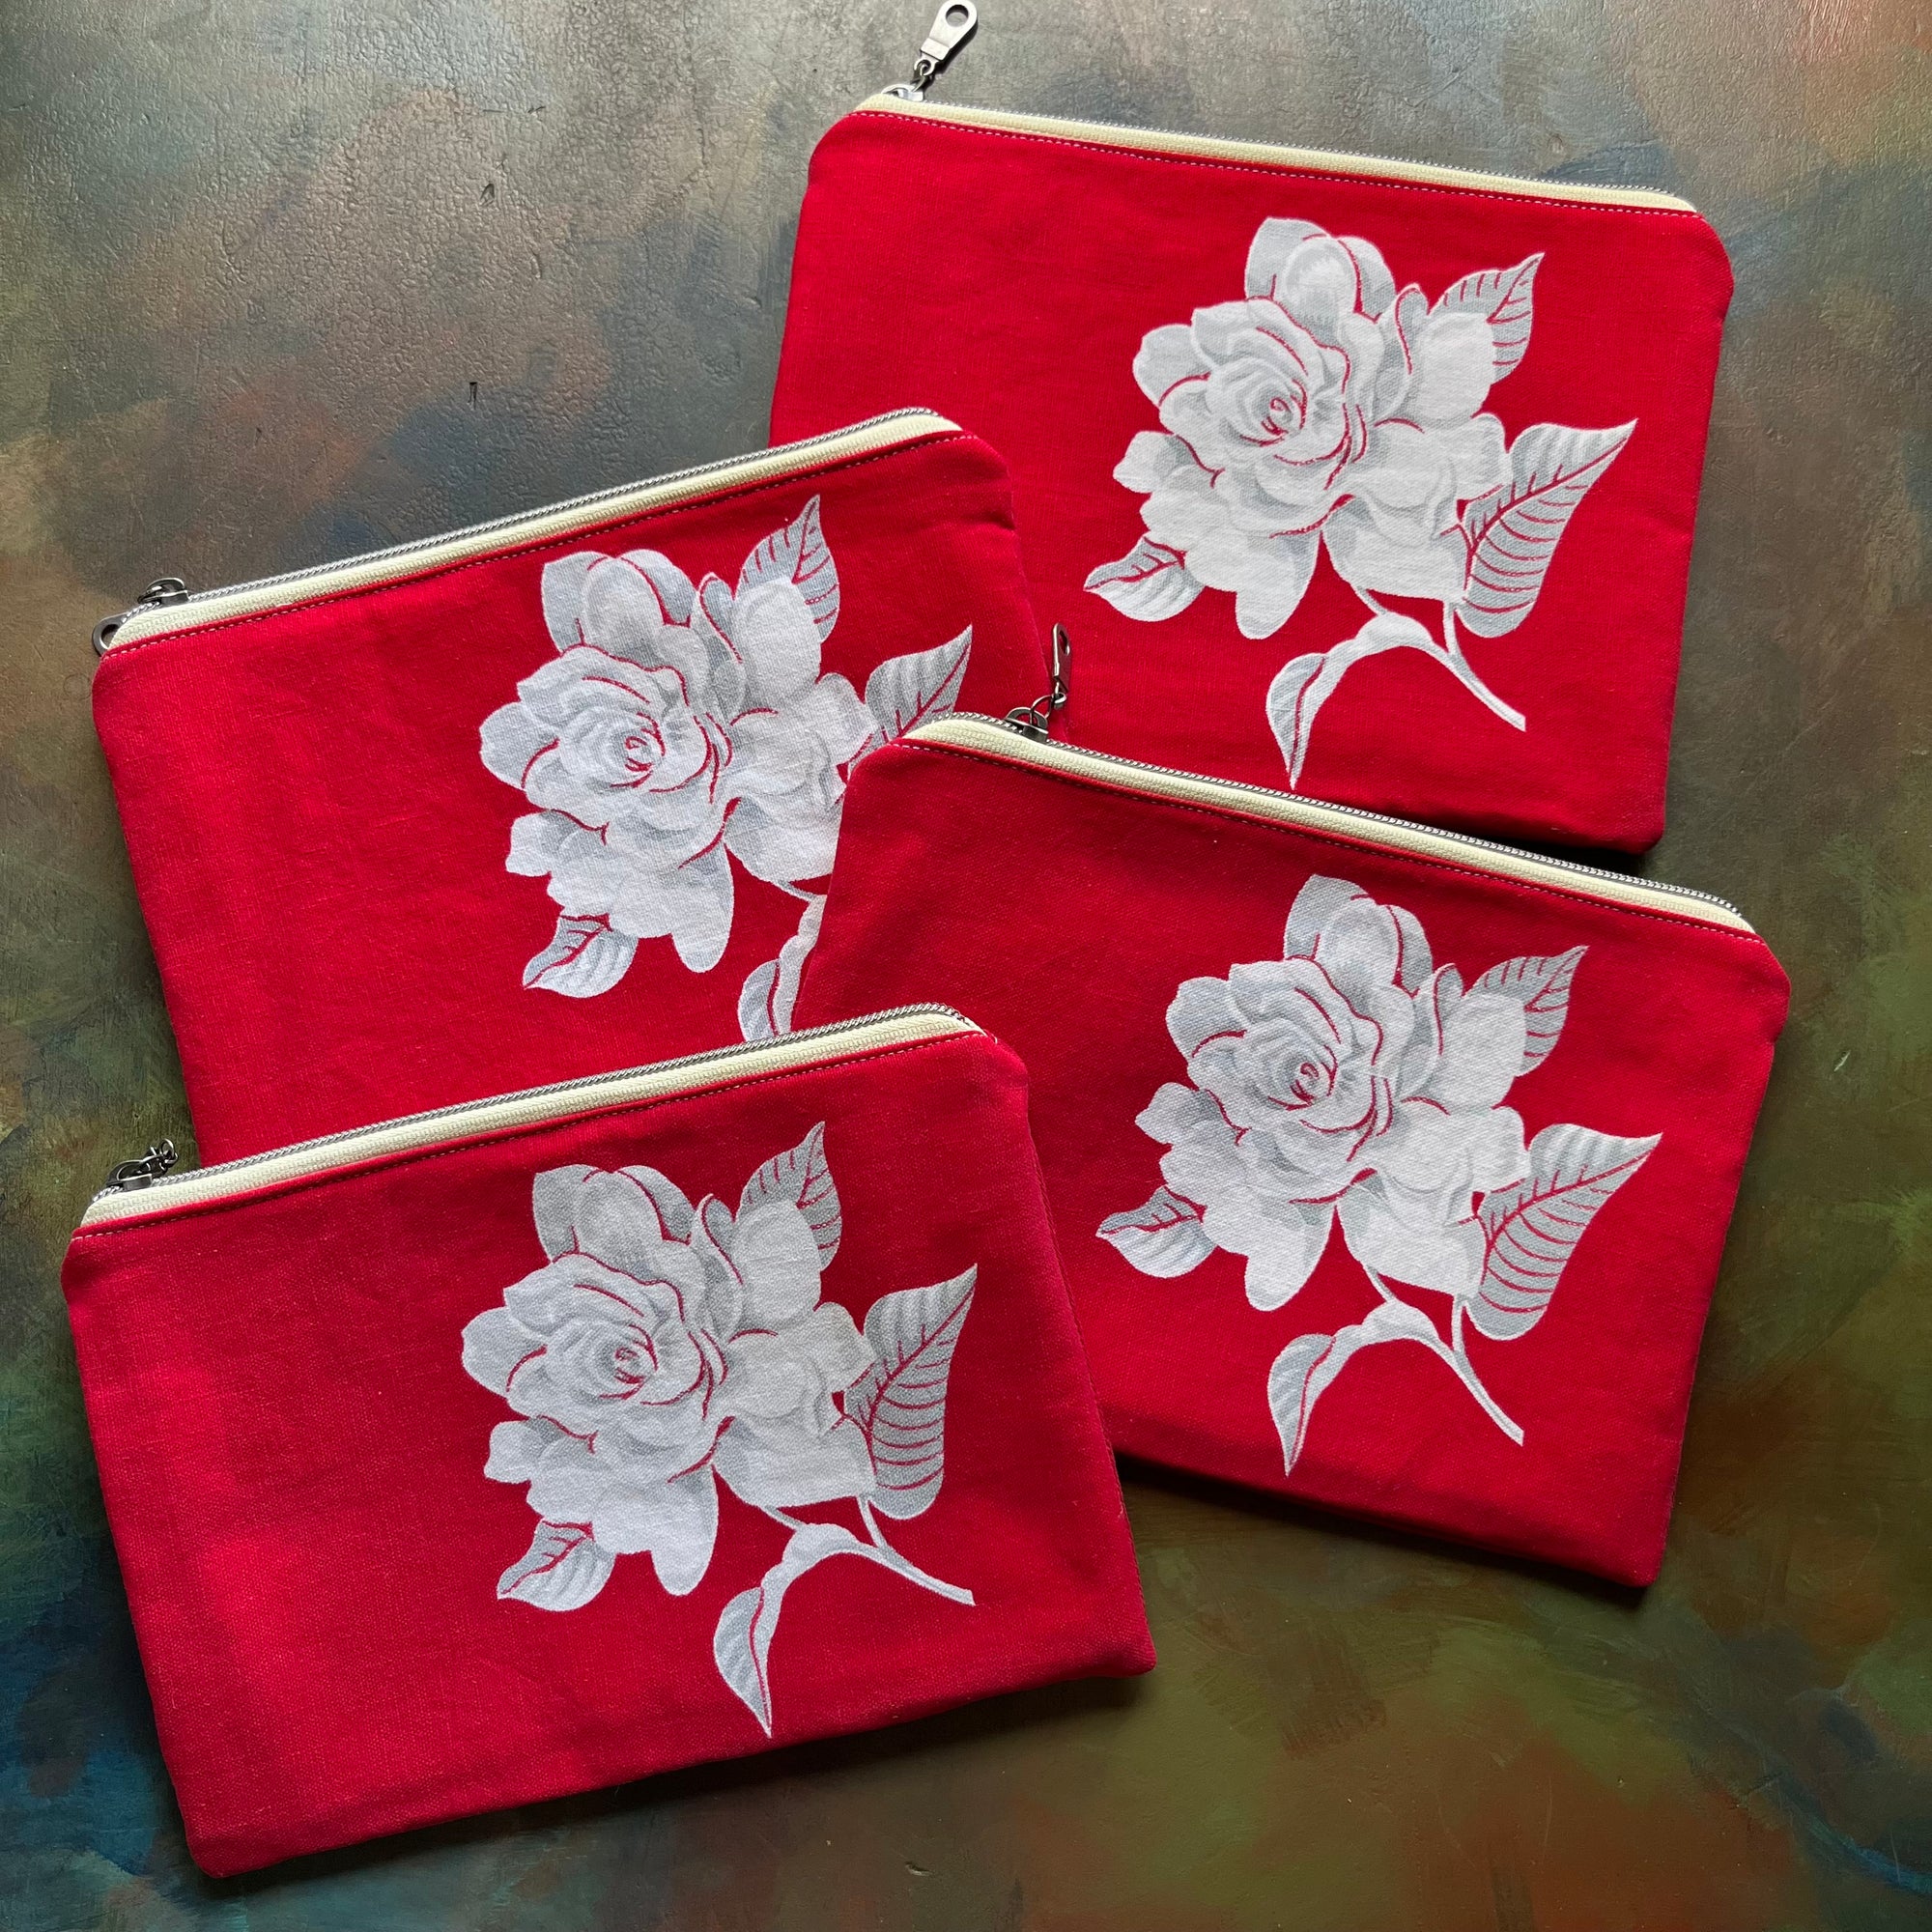 Wilendur White Rose on Red Oversized Pencil Case - Small Clutch